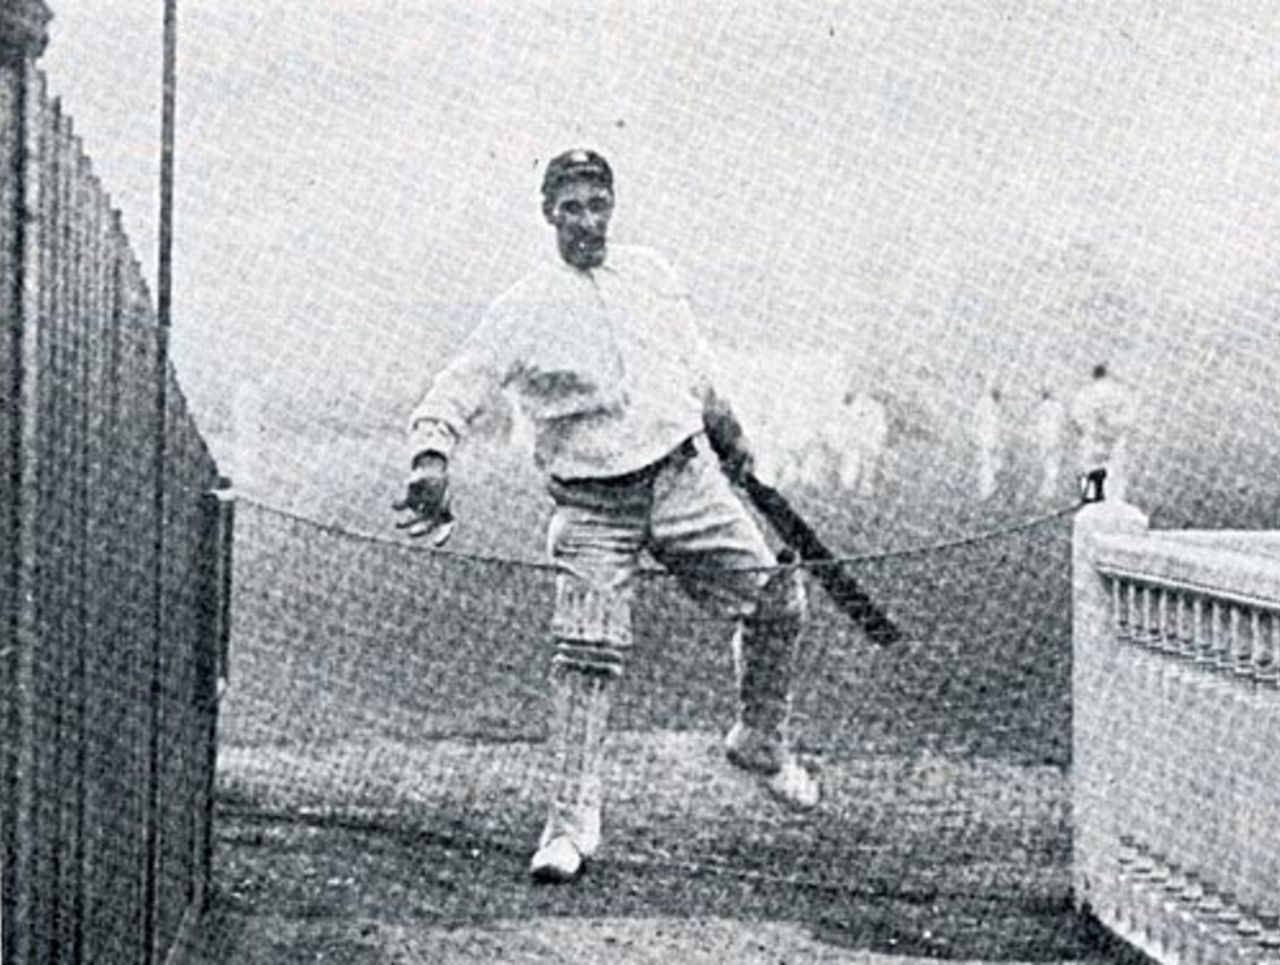 Albert Trott clambers over experimental boundary netting at Lord's, 1900